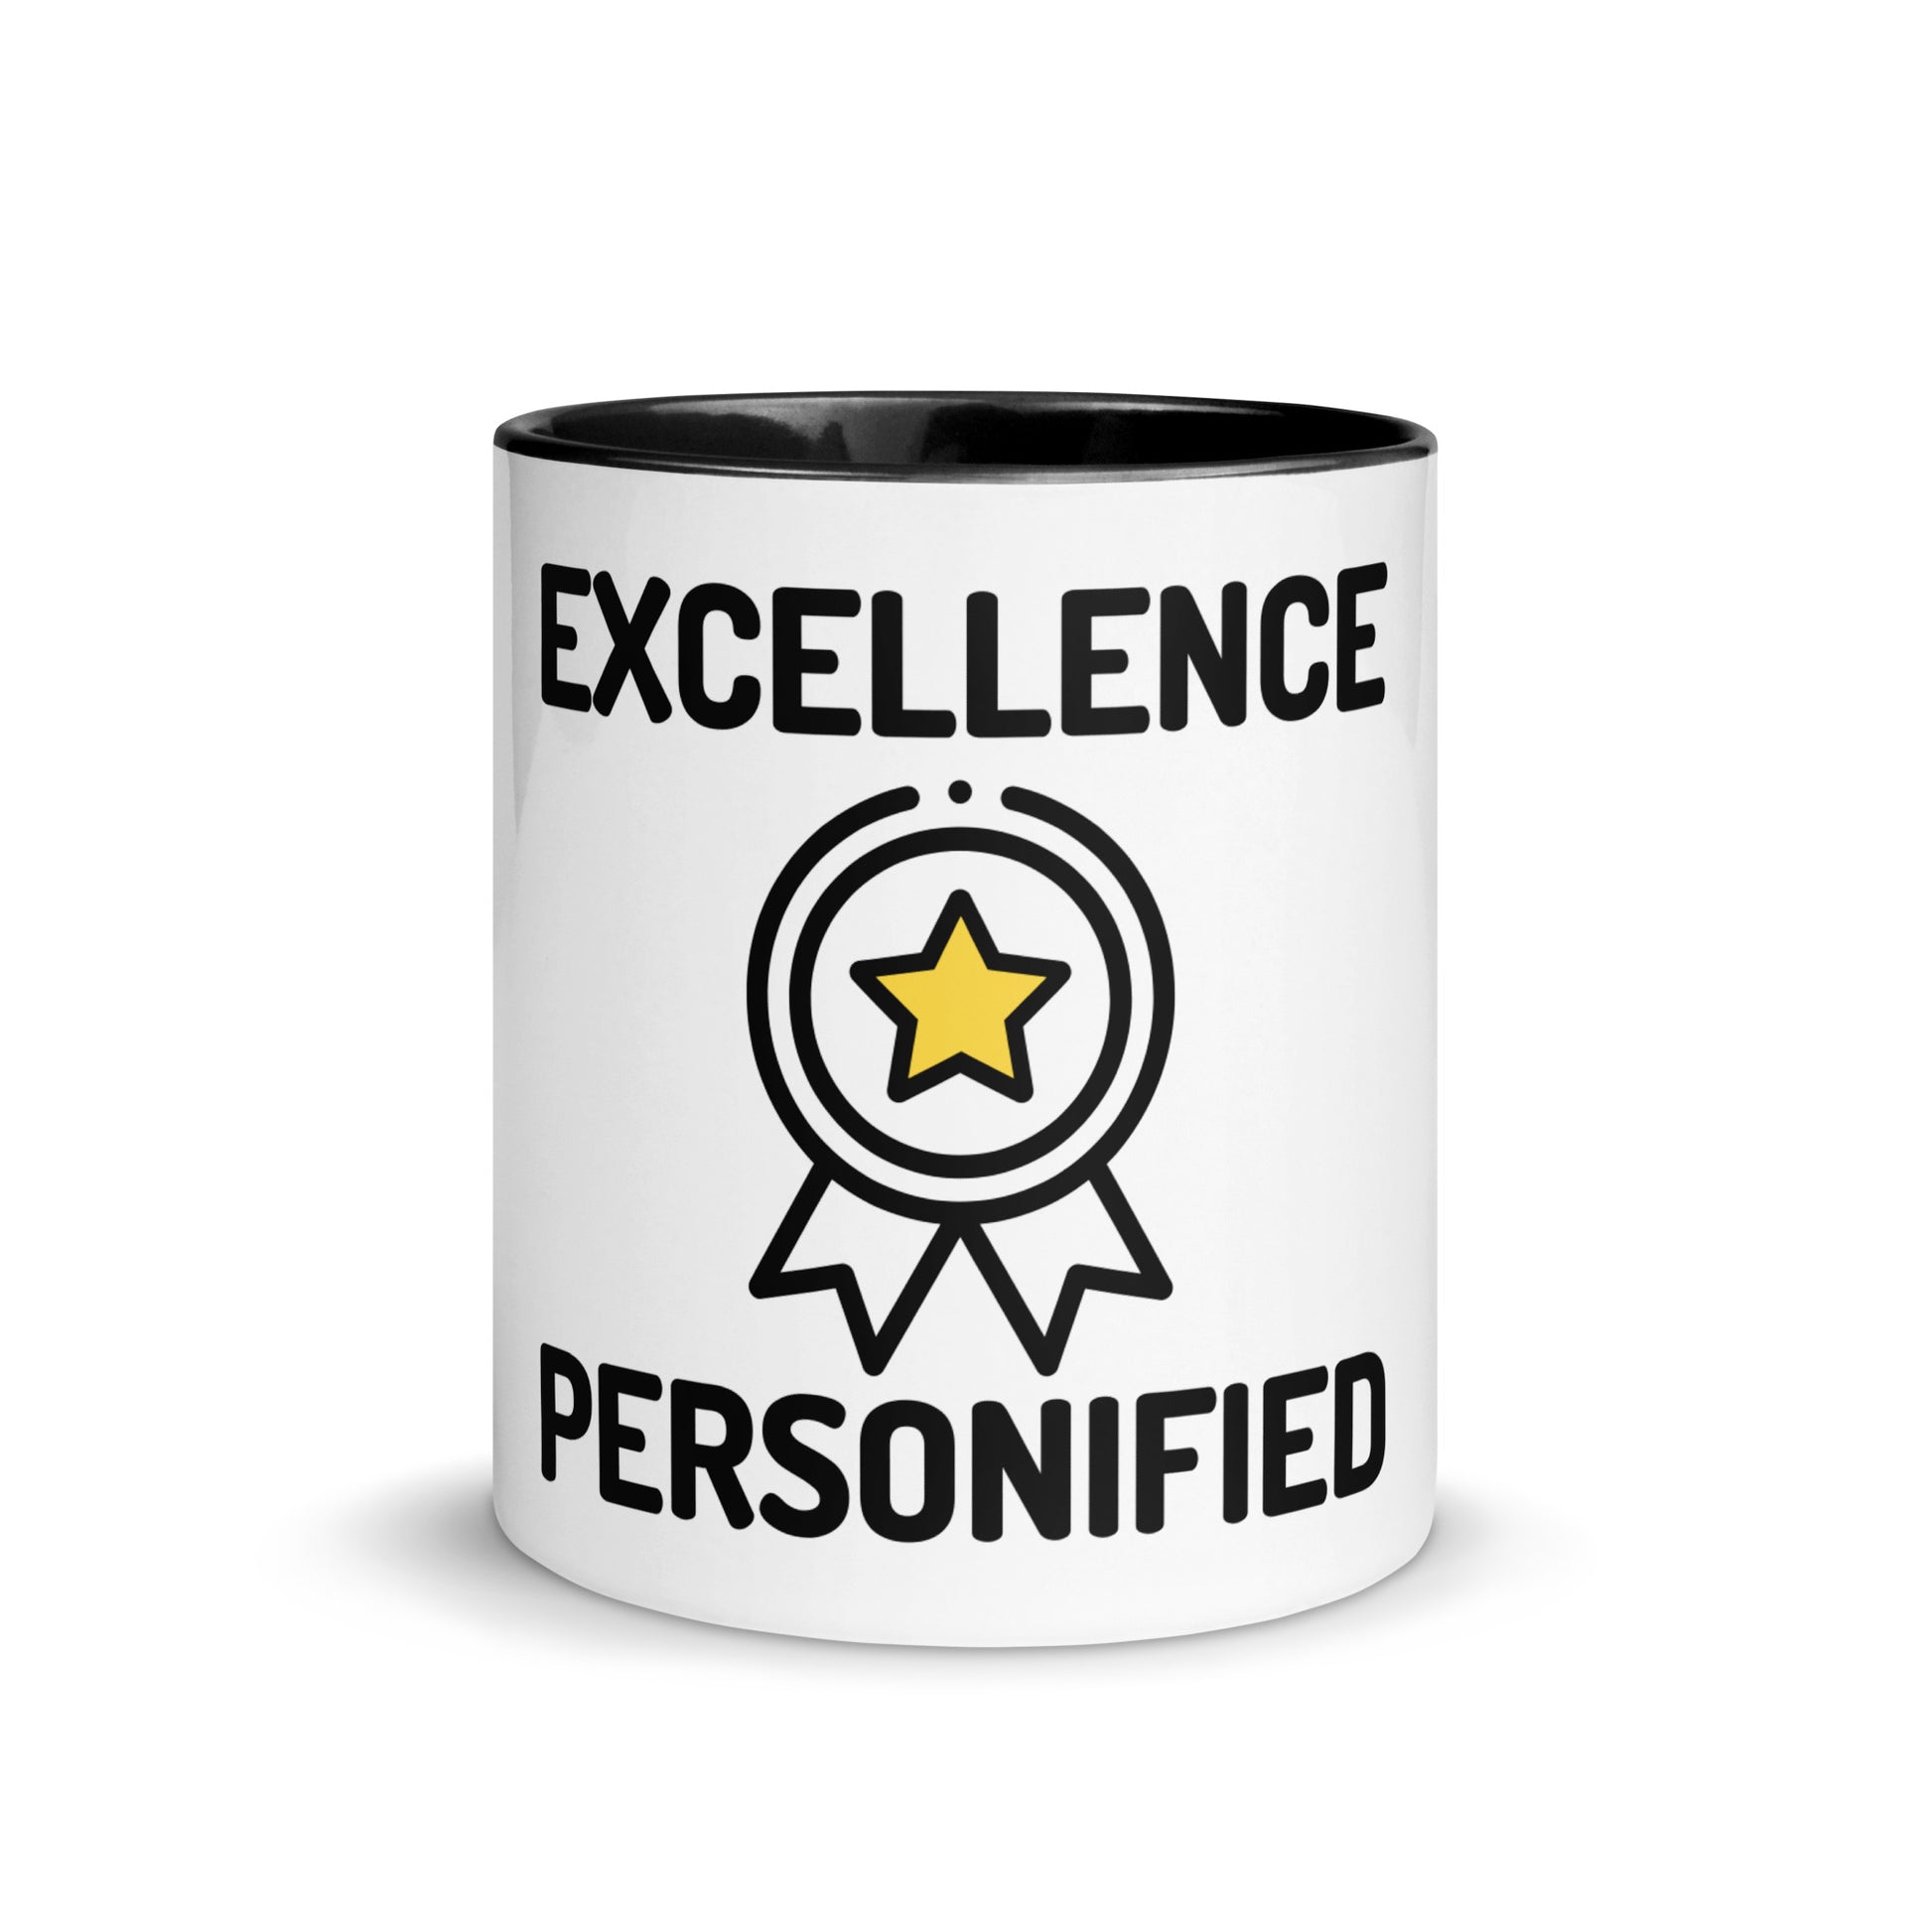 “Excellence Personified” Mug - Mug - Inspired by Change